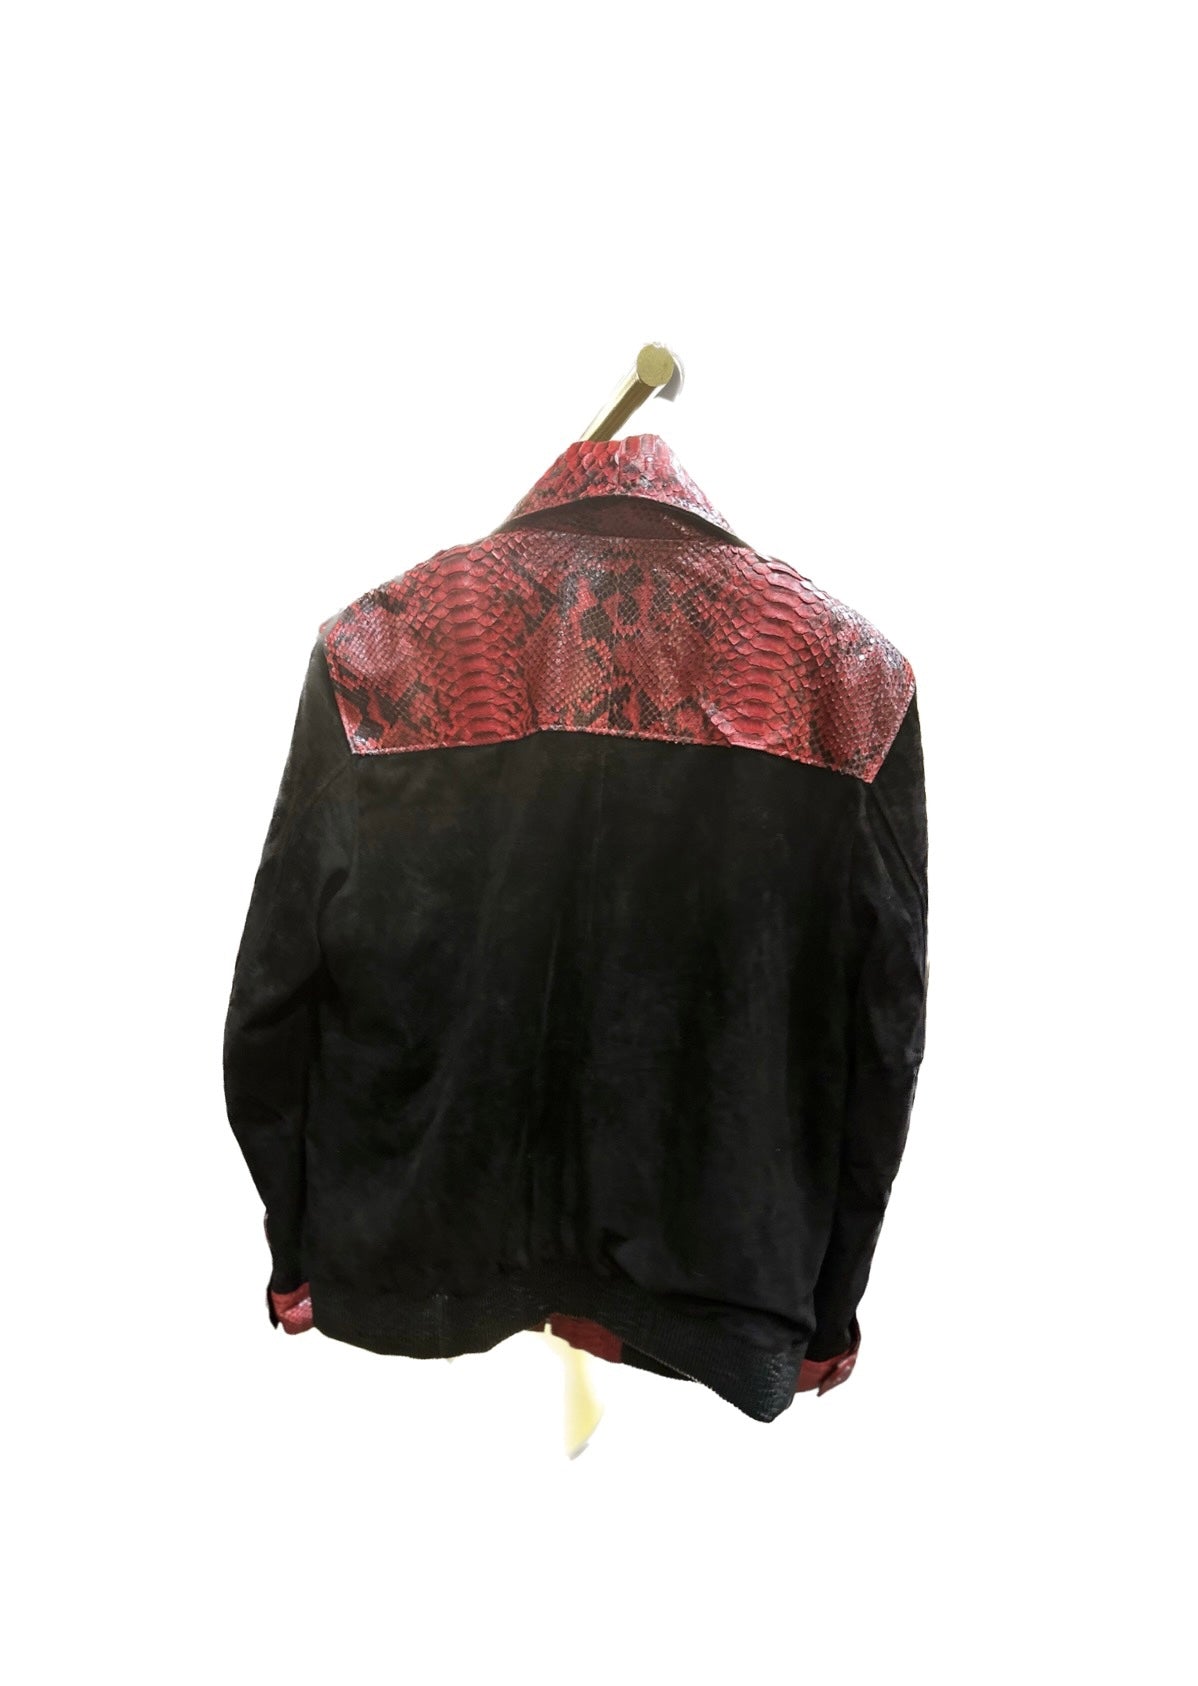 Red Snake with Lambskin Suede Jacket